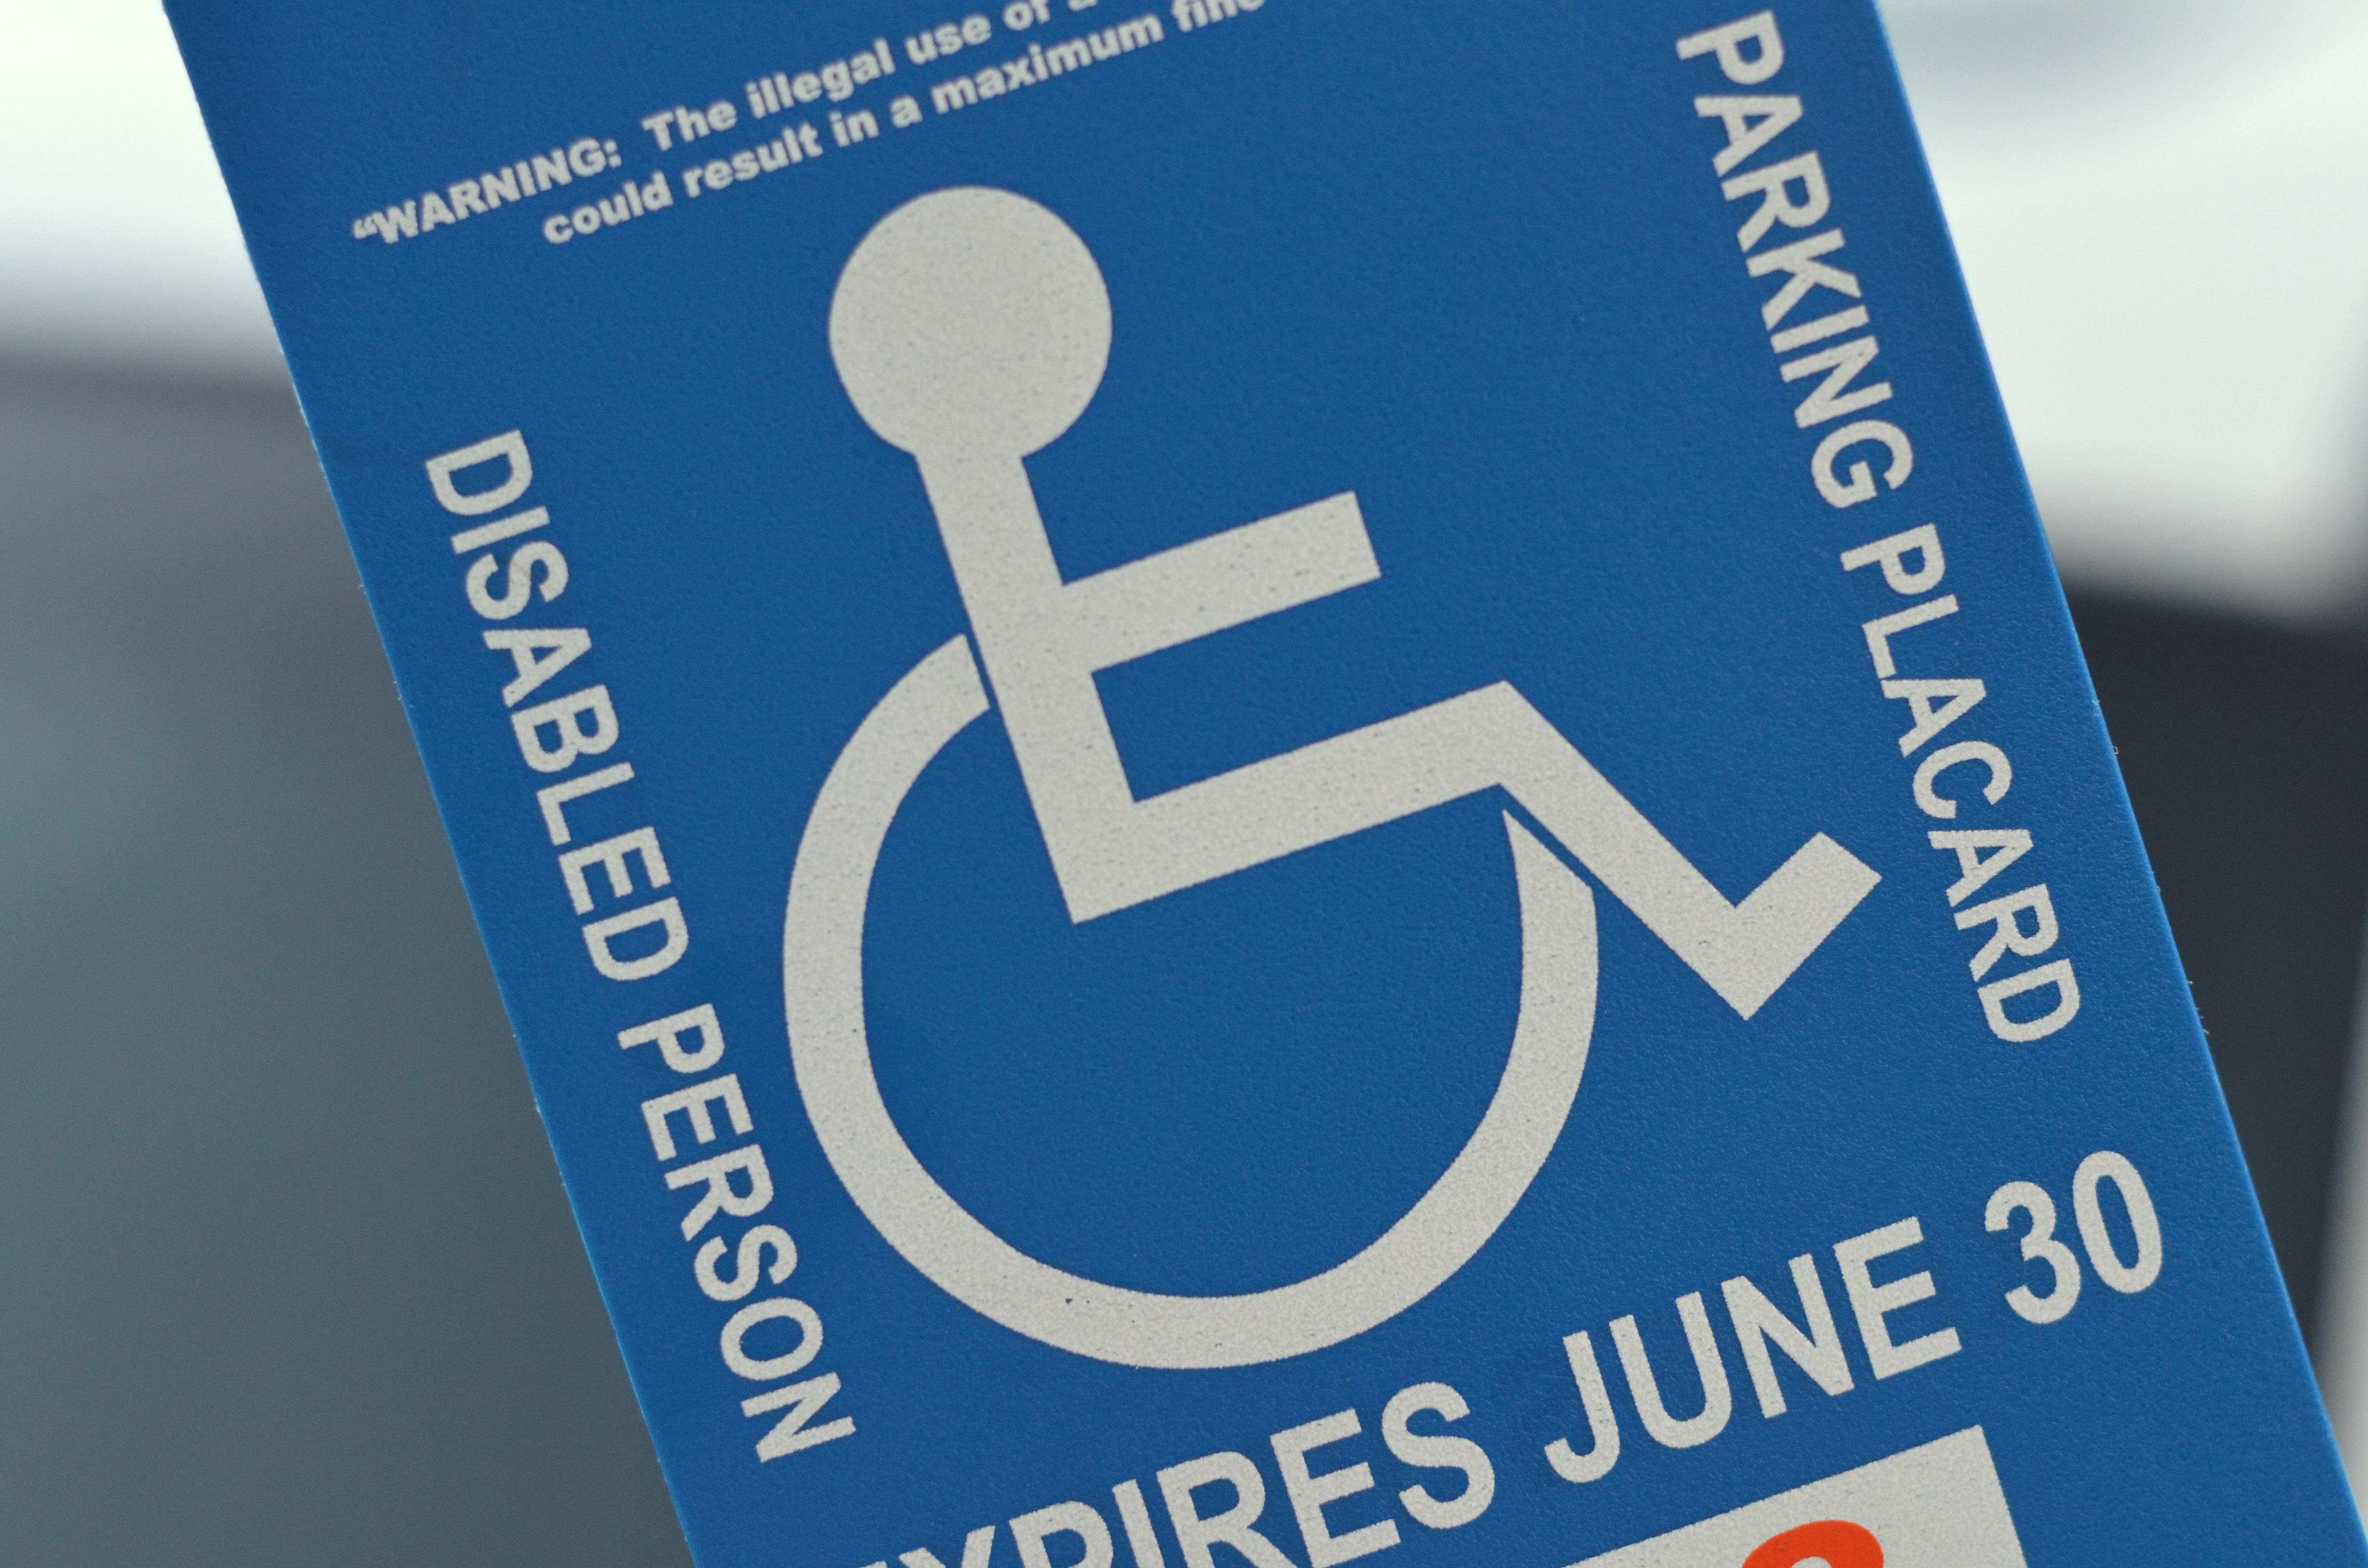 My disabled person parking placard.